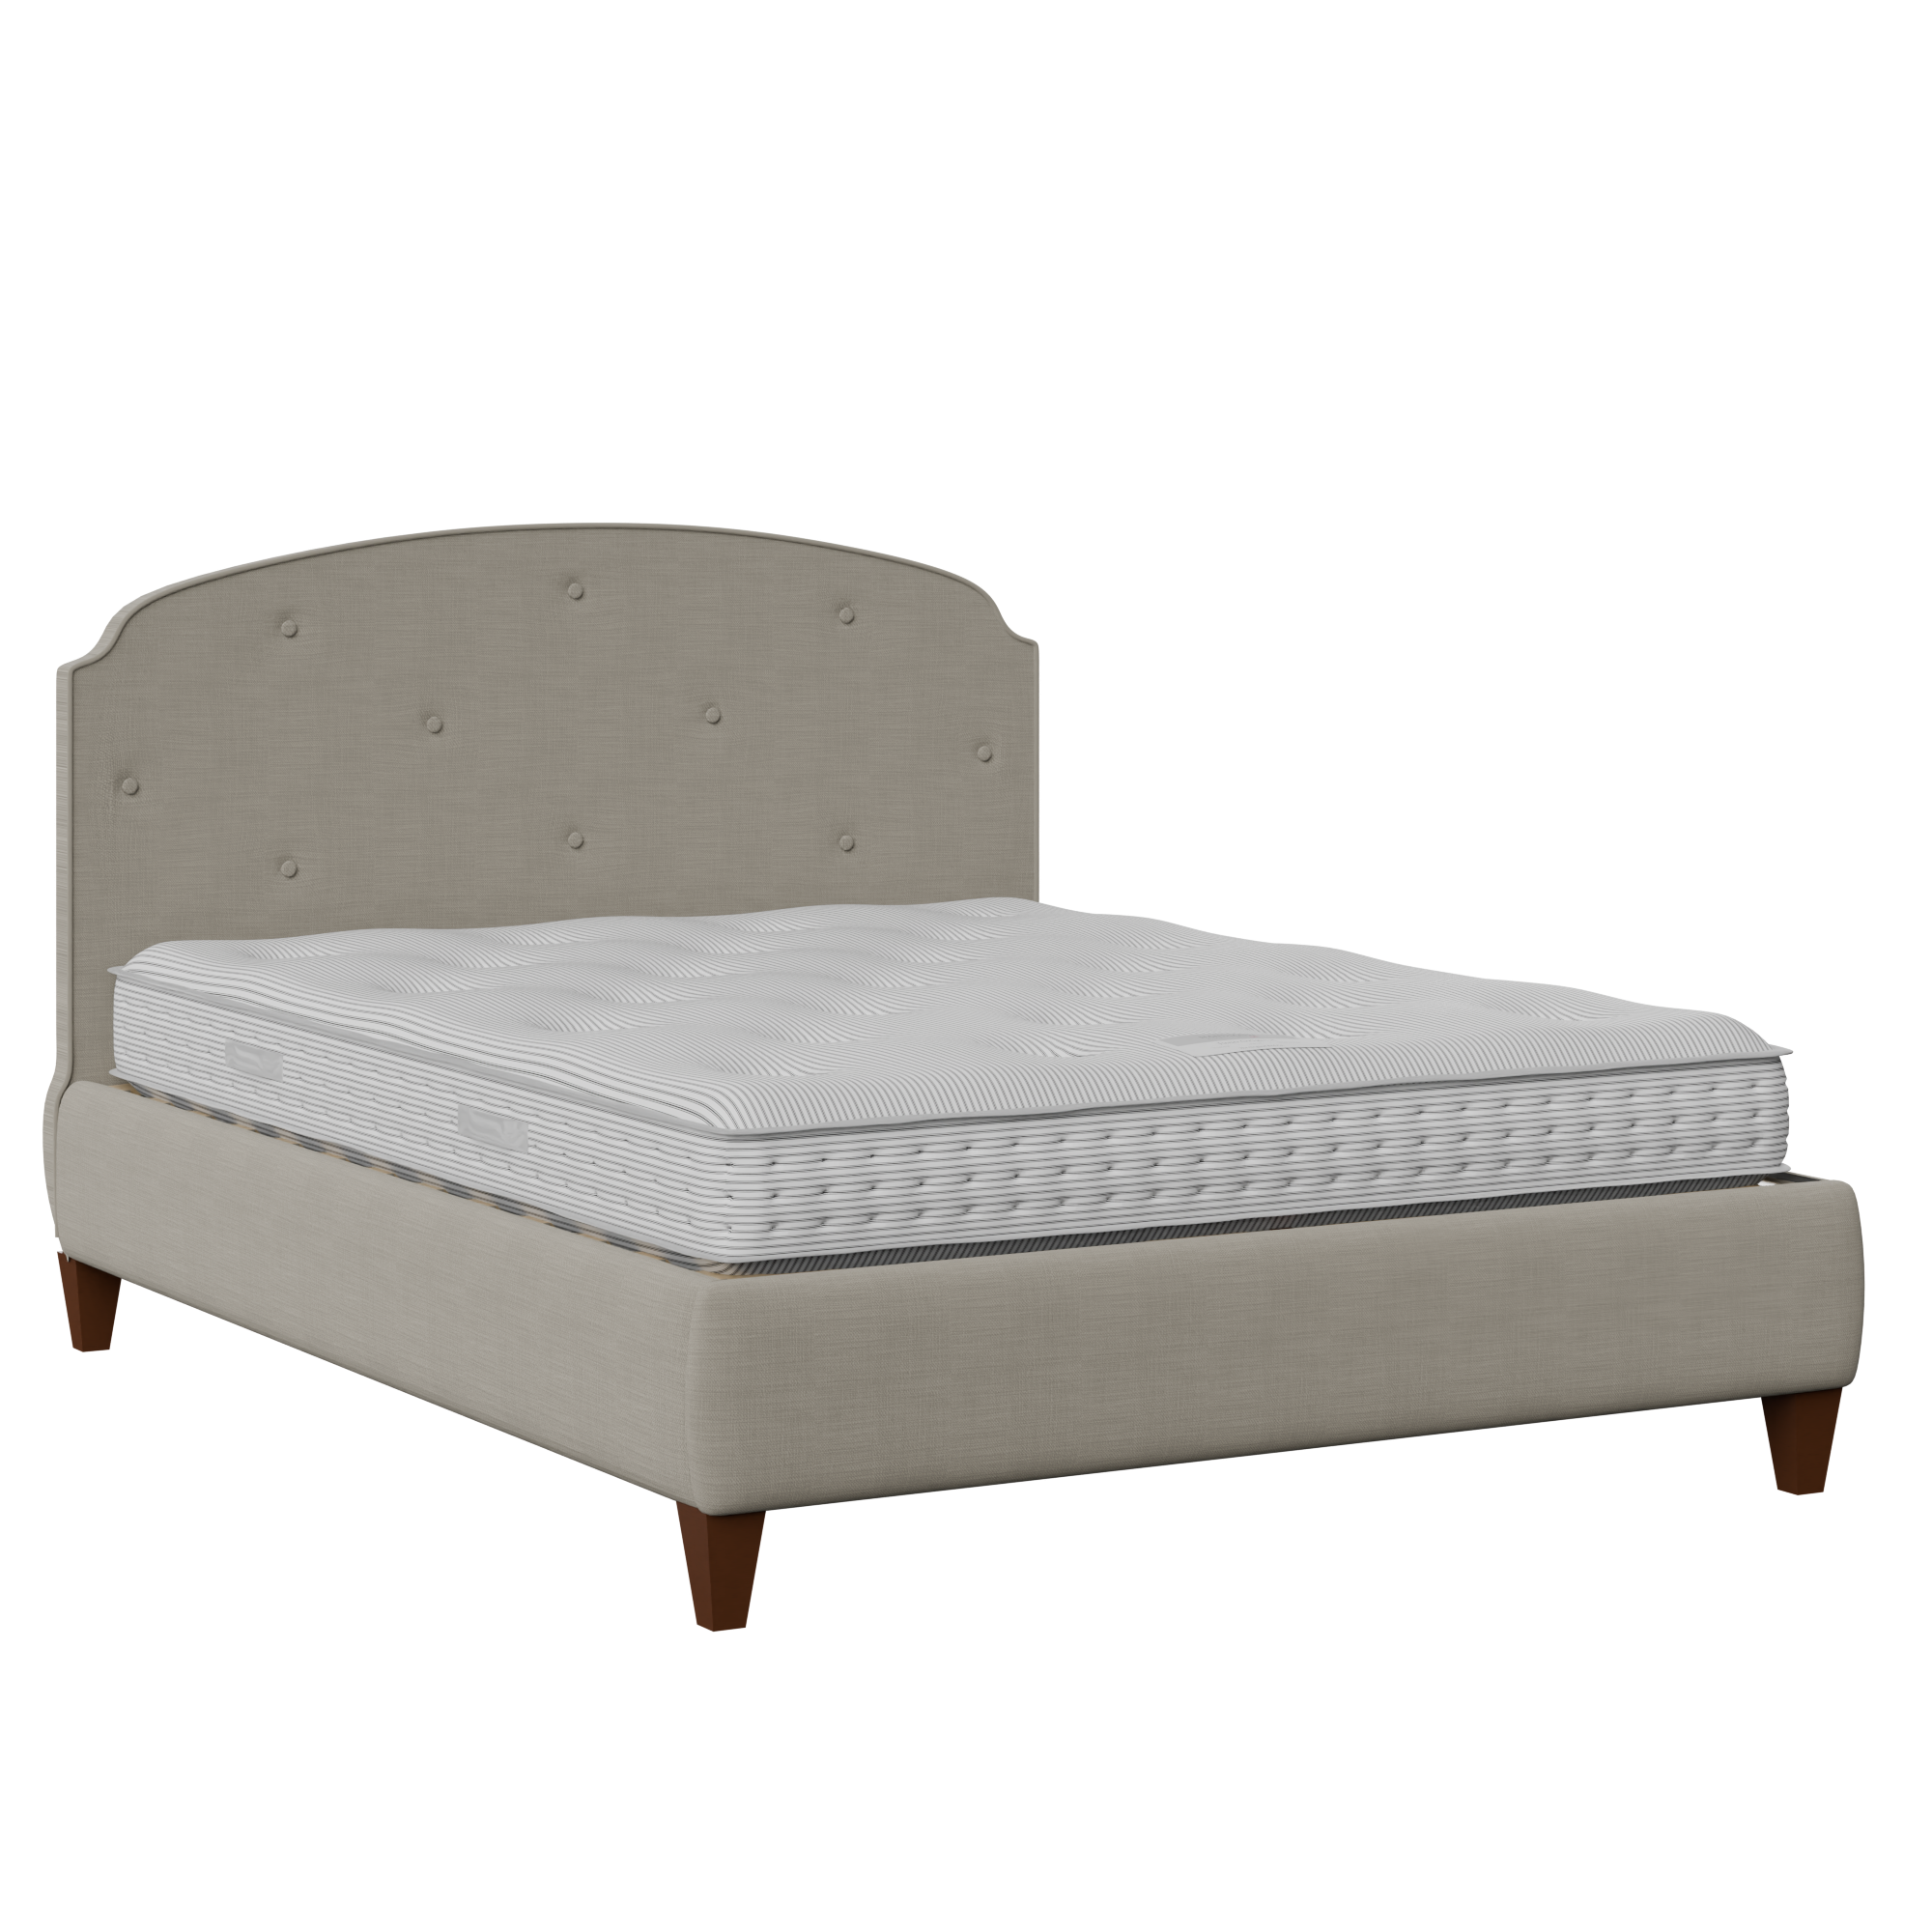 Lide Buttoned Diagonal upholstered bed in grey fabric